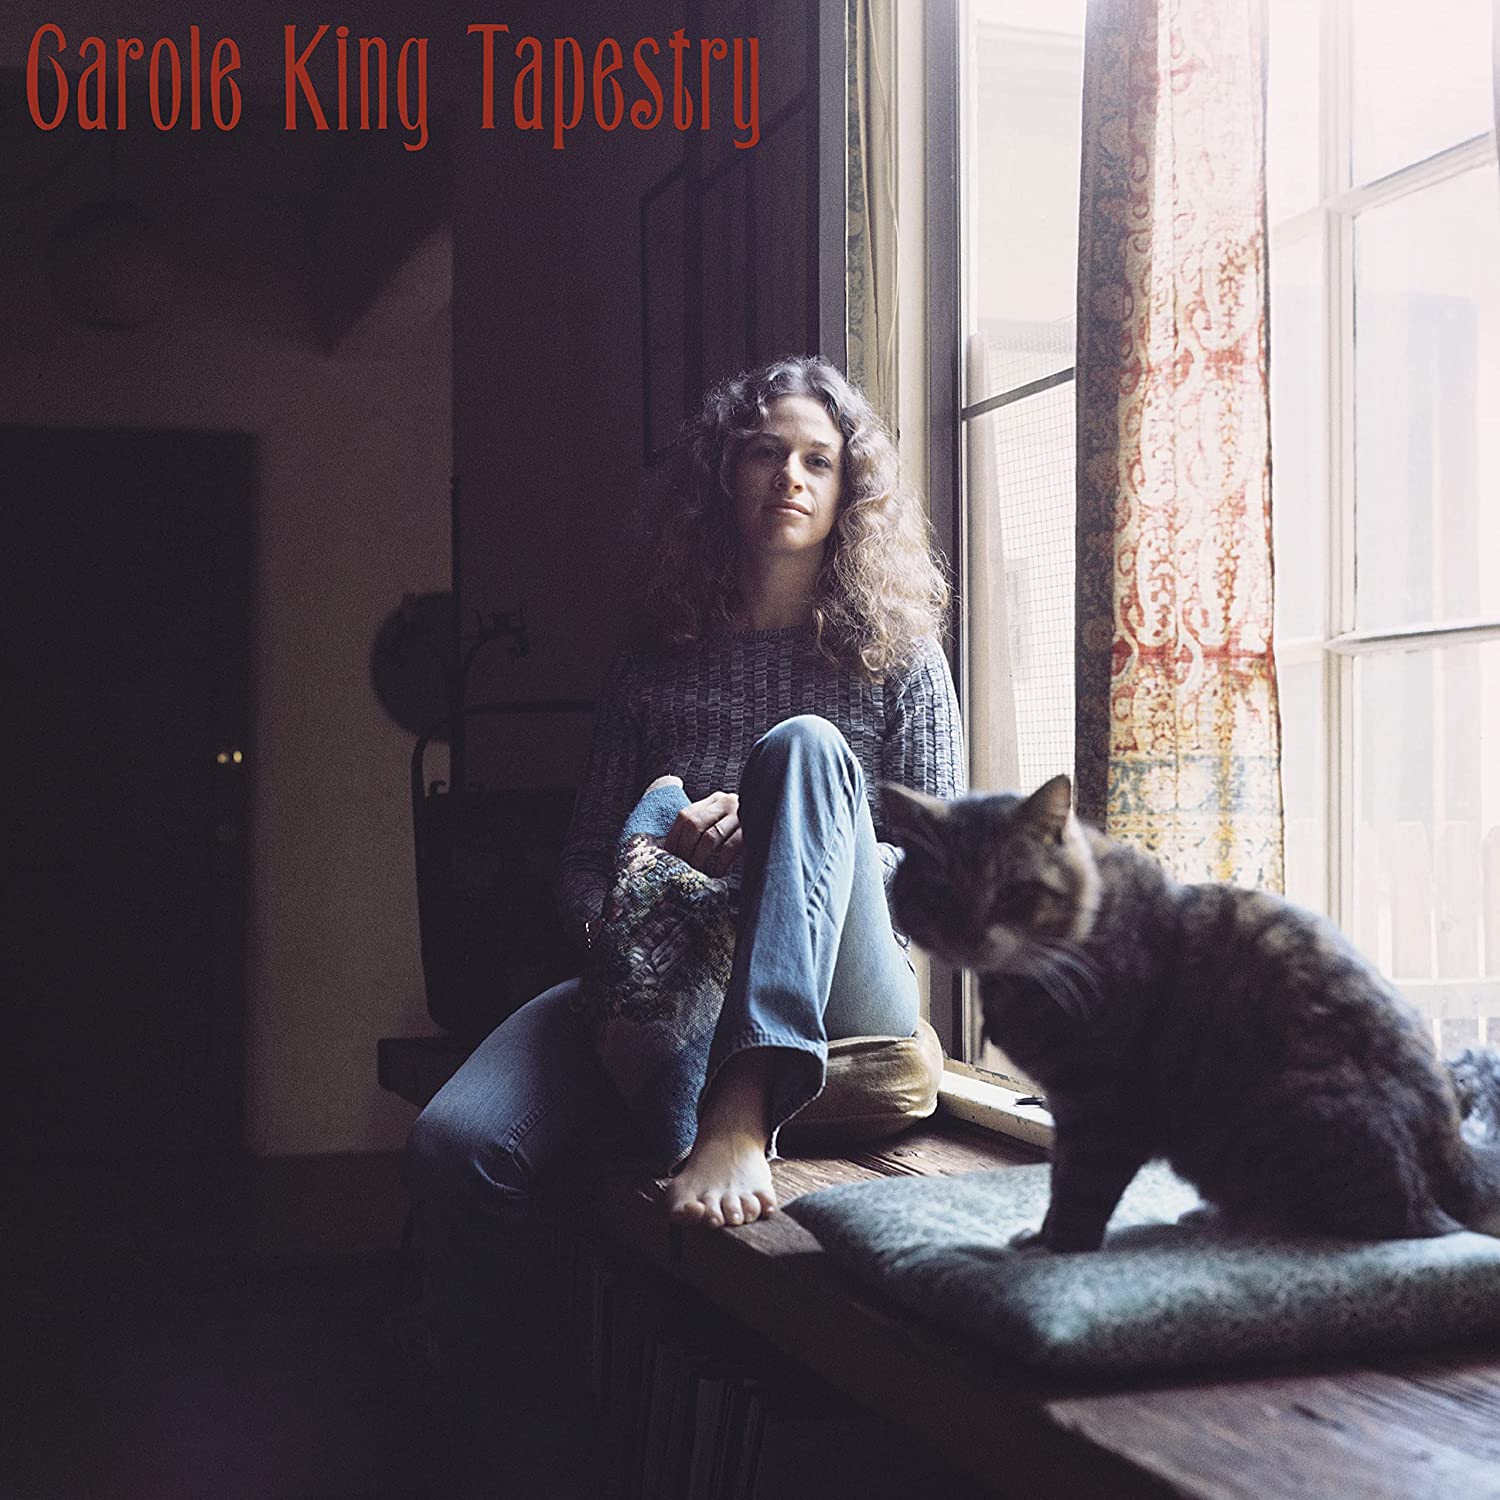 A stone-cold classic: Carole King’s Tapestry